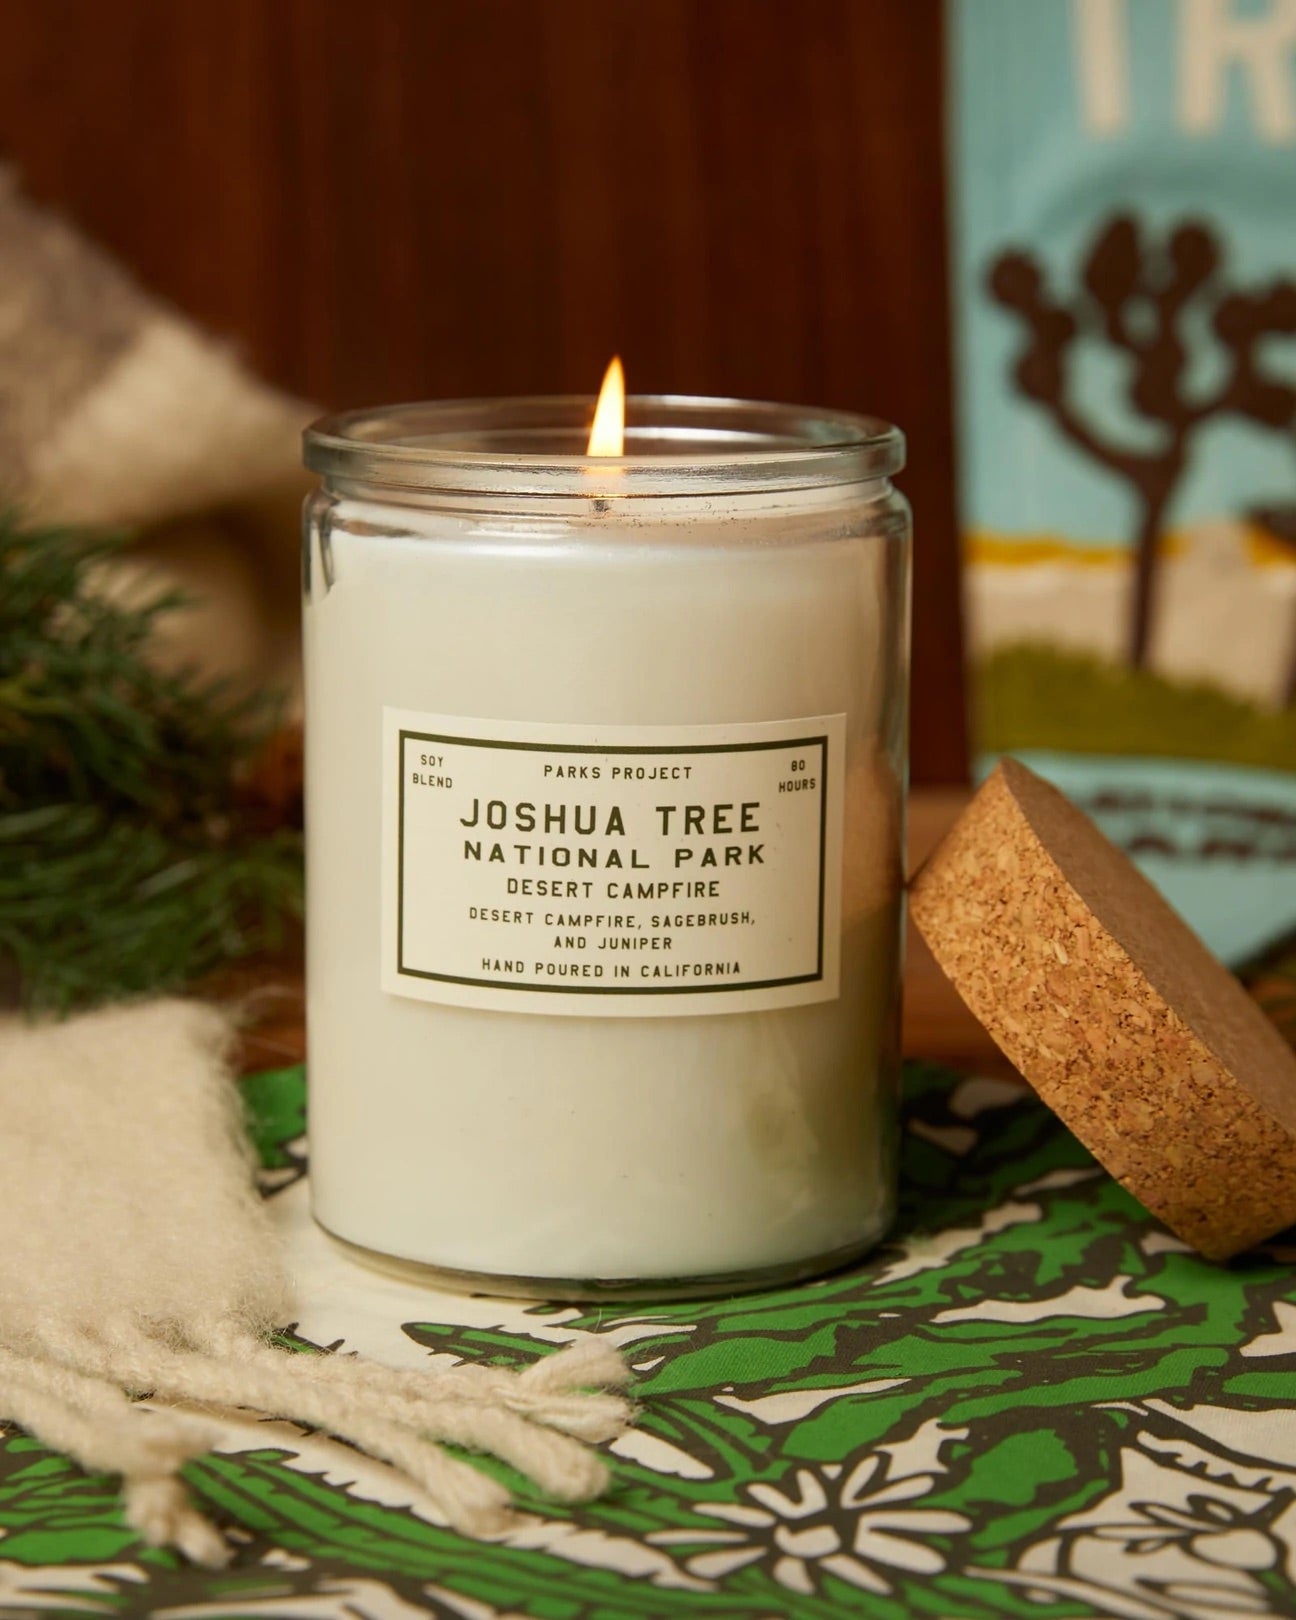 PARKS PROJECT Joshua Tree Desert Campfire Candle｜SP20-95